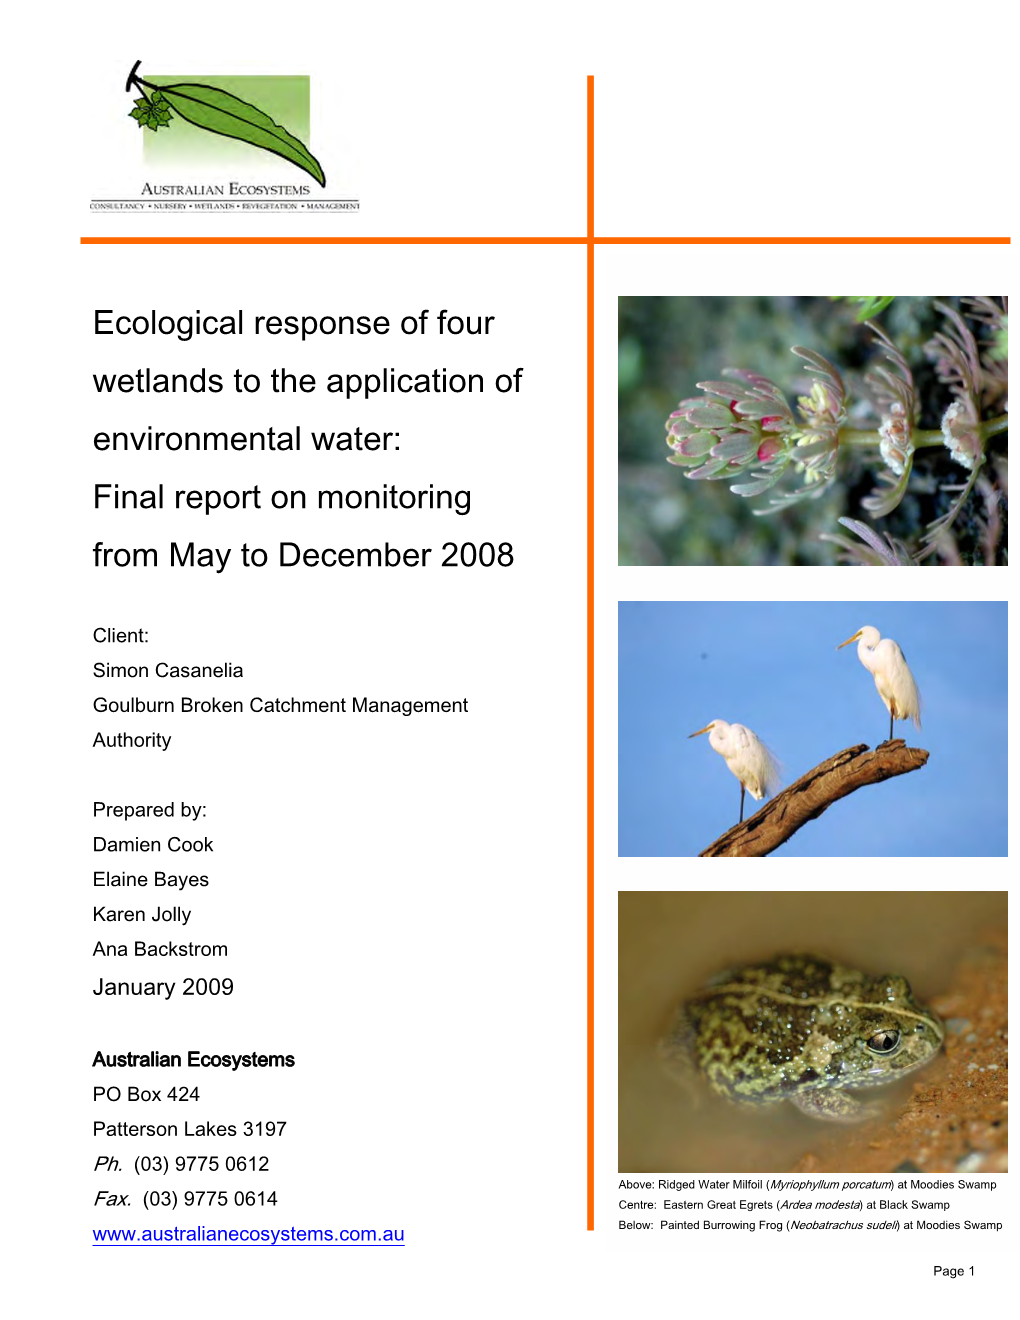 Ecological Response of Four Wetlands to the Application of Environmental Water: Final Report on Monitoring from May to December 2008